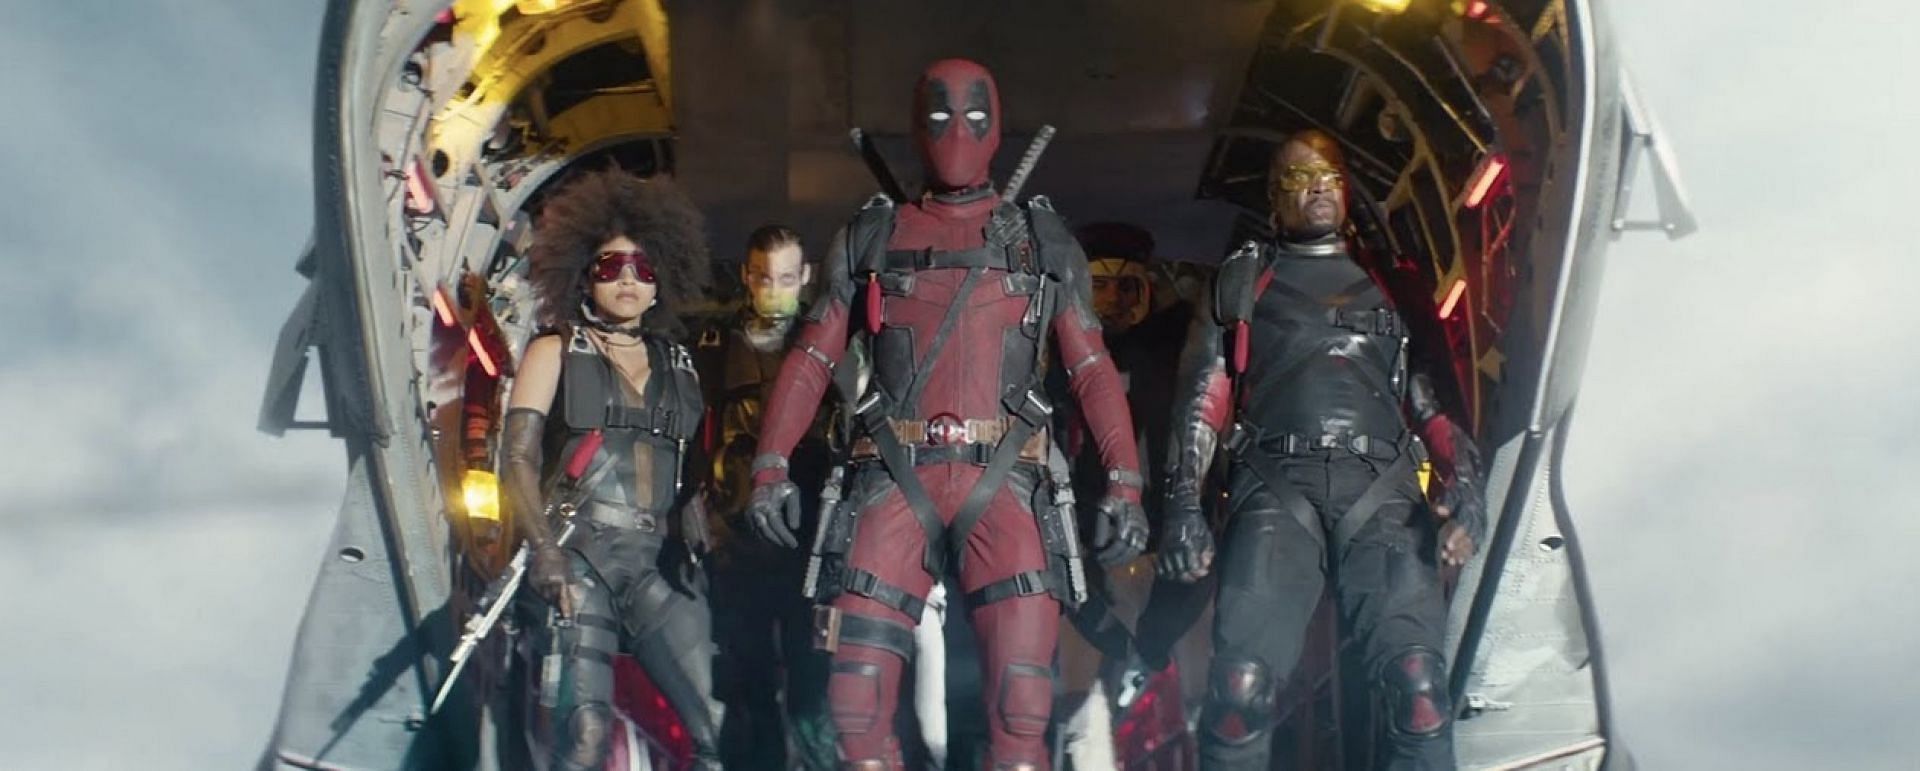 The X-Force team in action in Deadpool 2 (Image via 20th Century Fox)